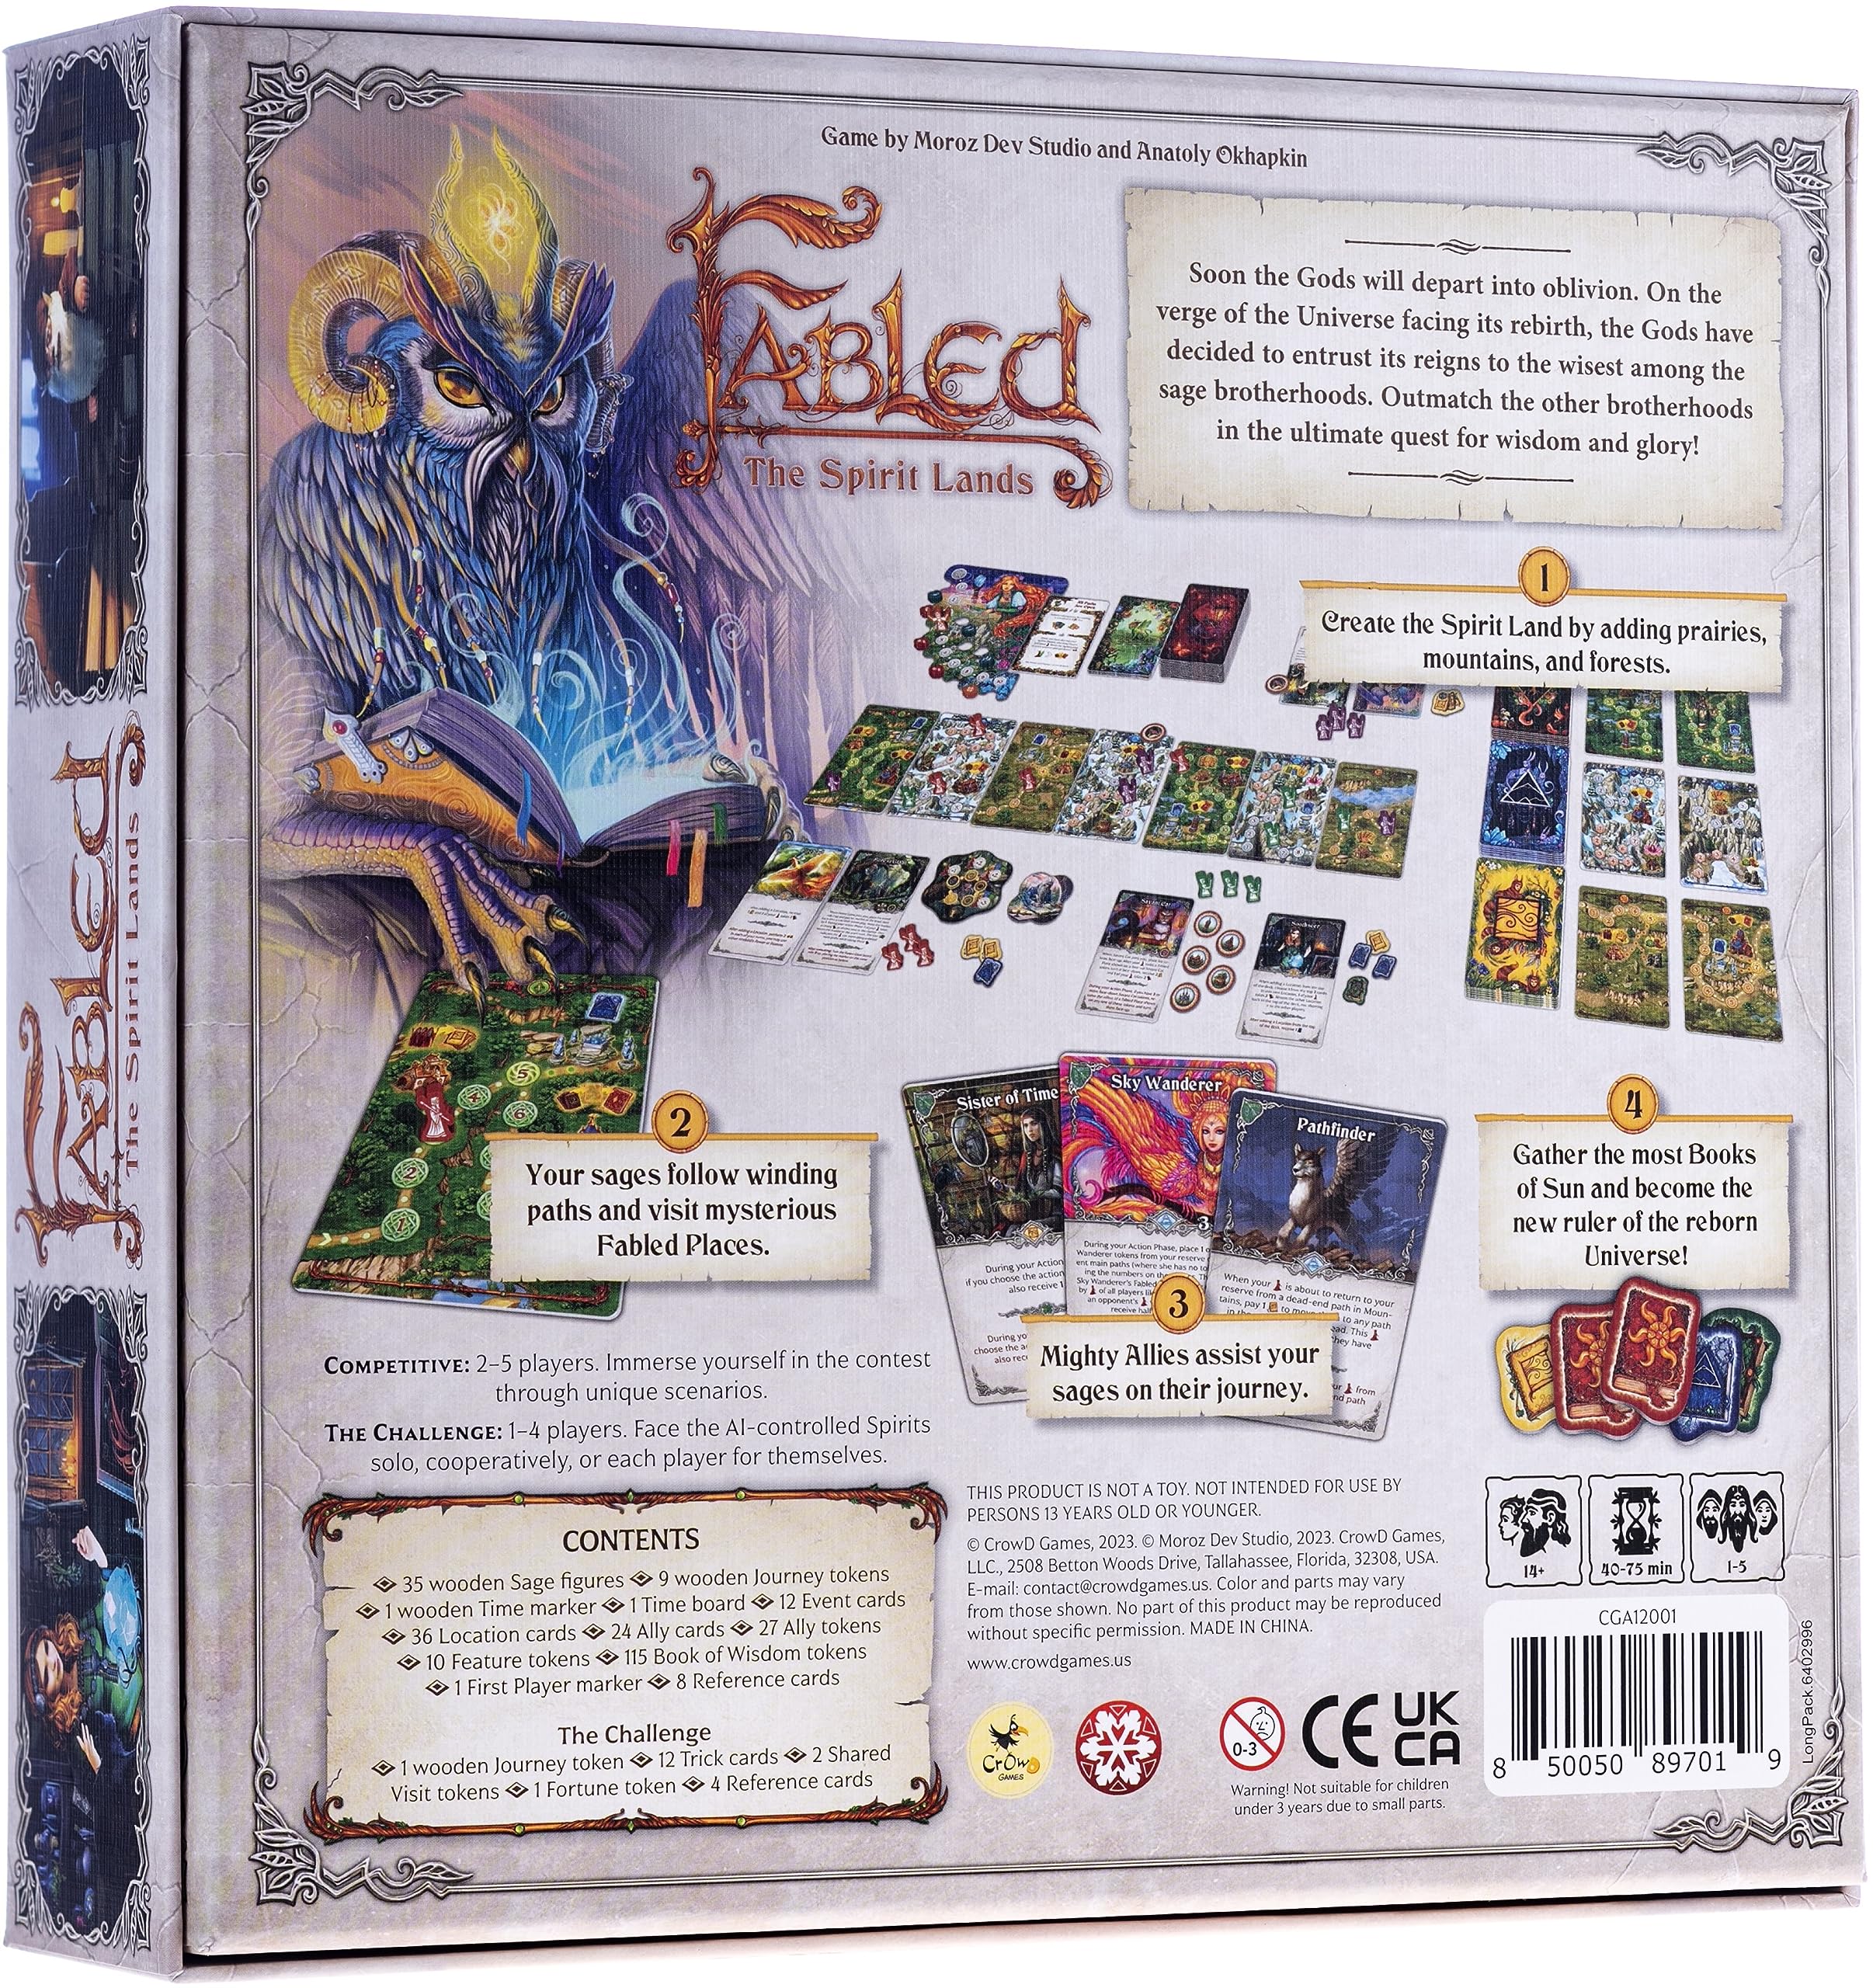 Fabled: The Spirit Lands | 1-5 Players | Ages 14 and up | Fantasy | Strategy | Average Playtime 40-75 min